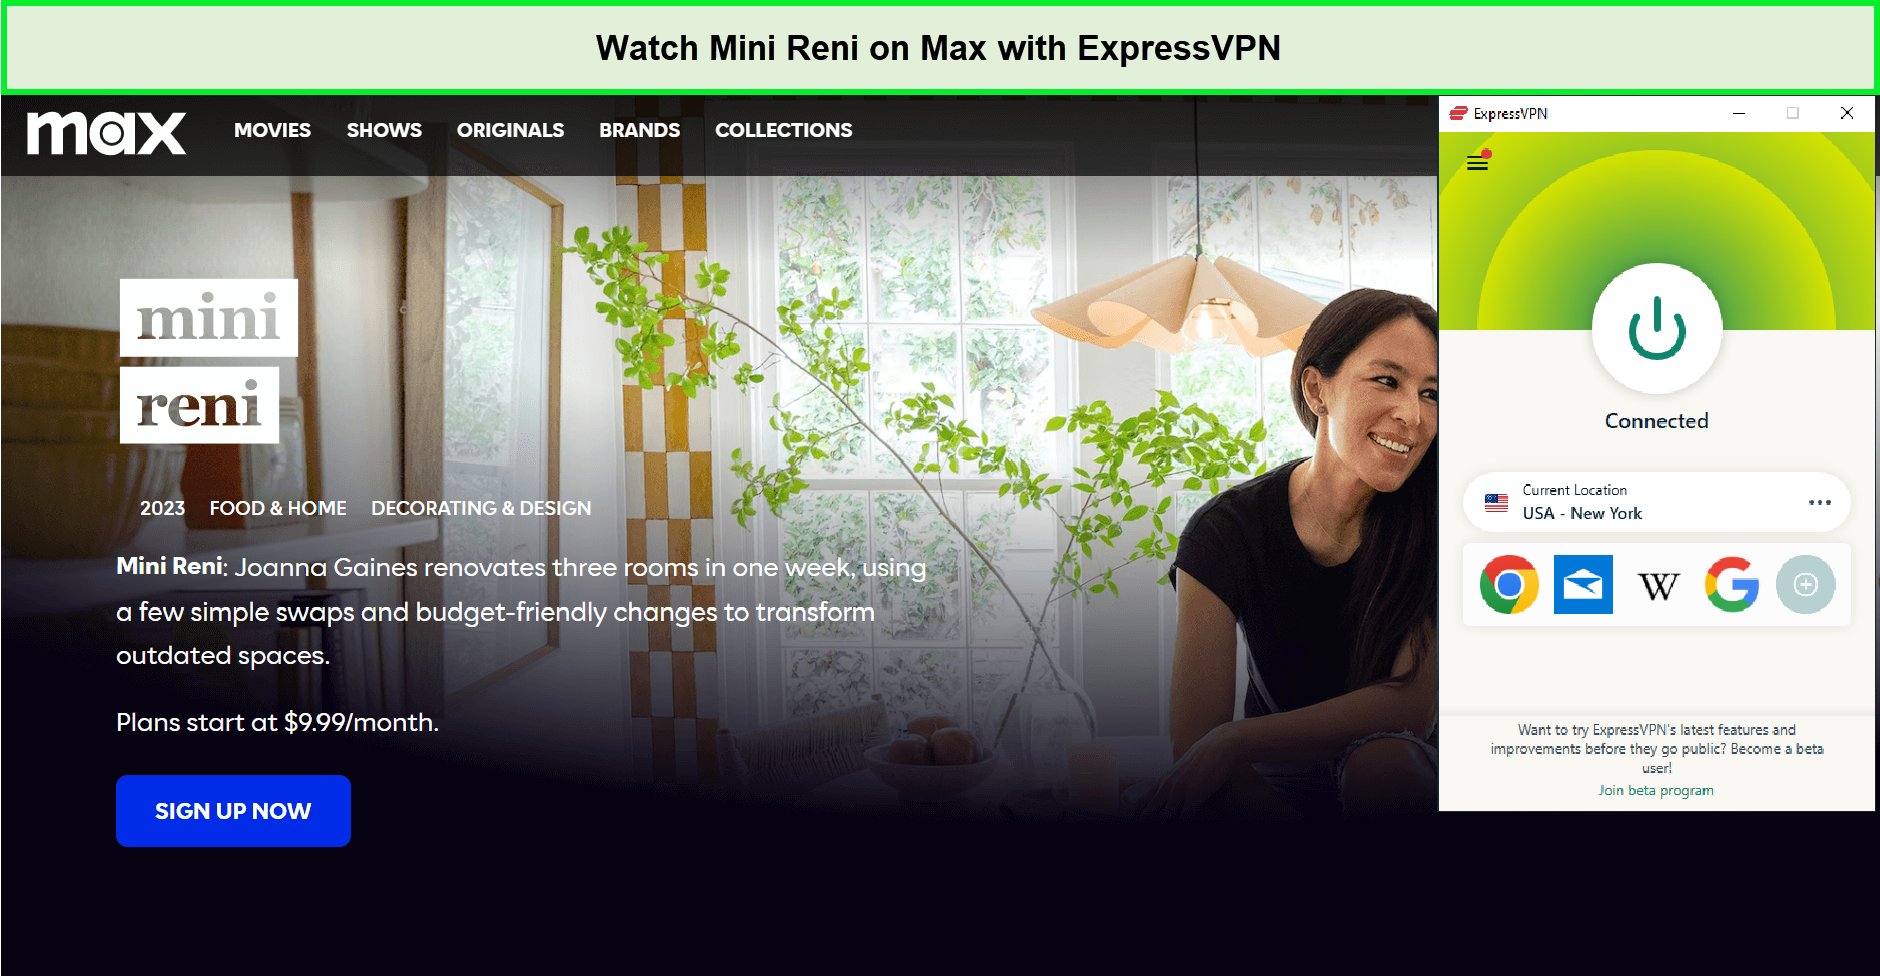 Watch-Mini-Reni-in-Germany-on-Max-with-ExpressVPN